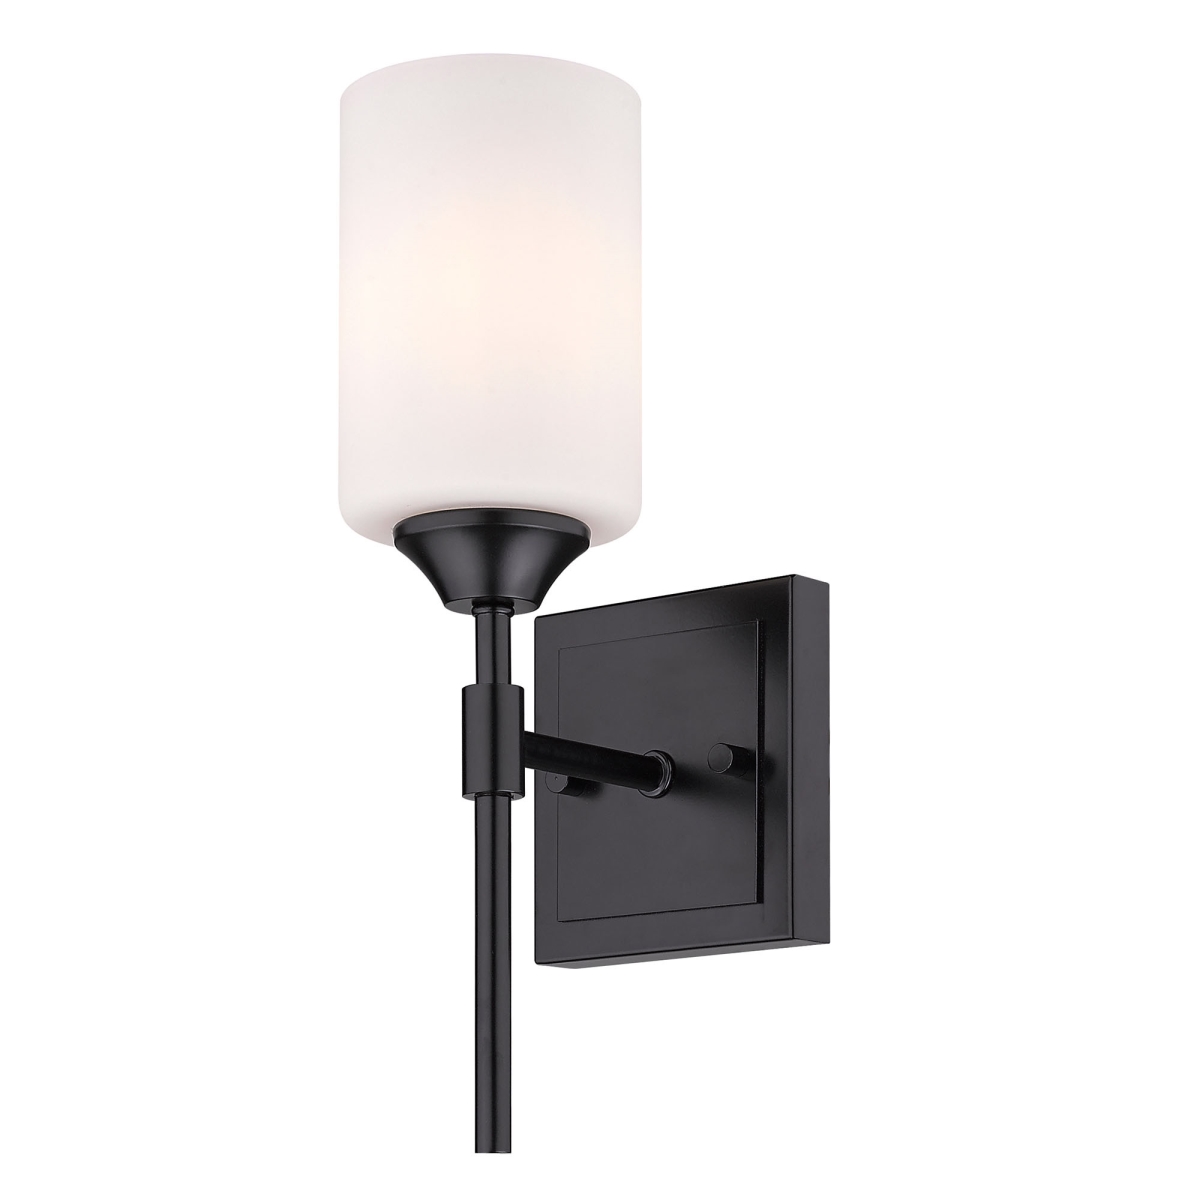 2120-ba1 Blk-cyl-op Ormond 1 Light Bath Vanity In Black With Cylindrical Opal Glass Shade